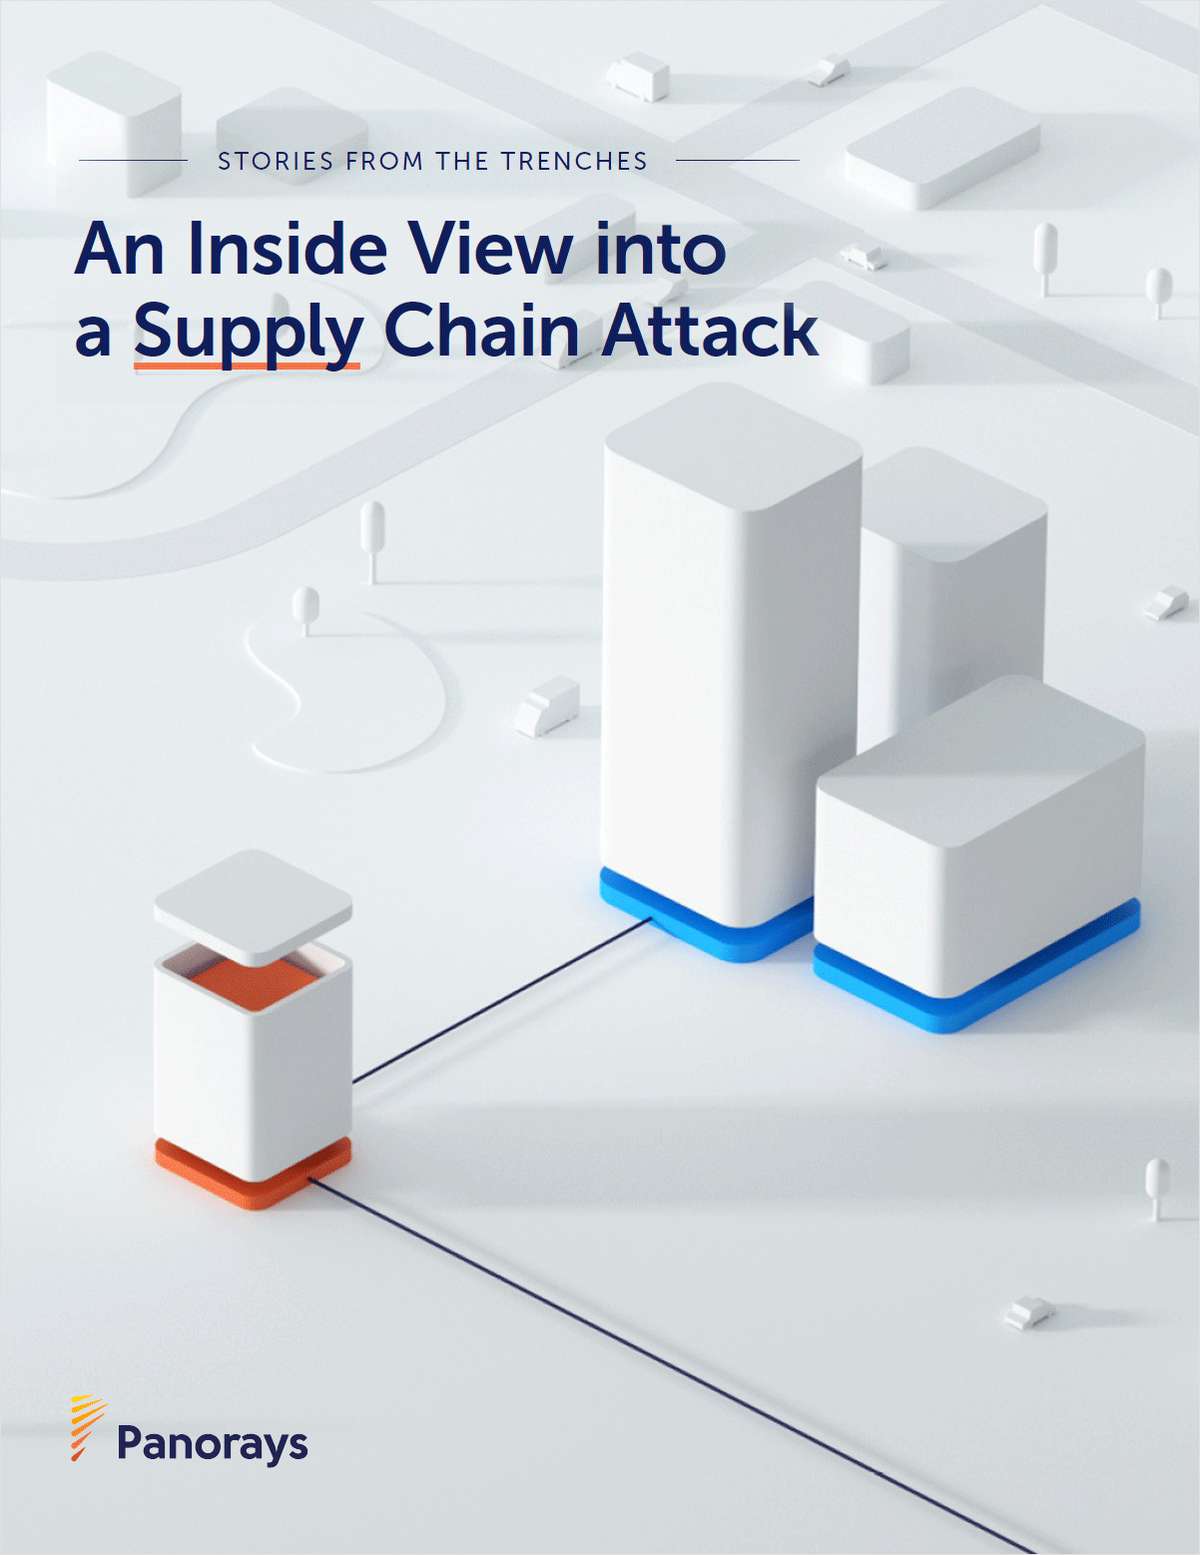 An Insider's View into a Supply Chain Attack